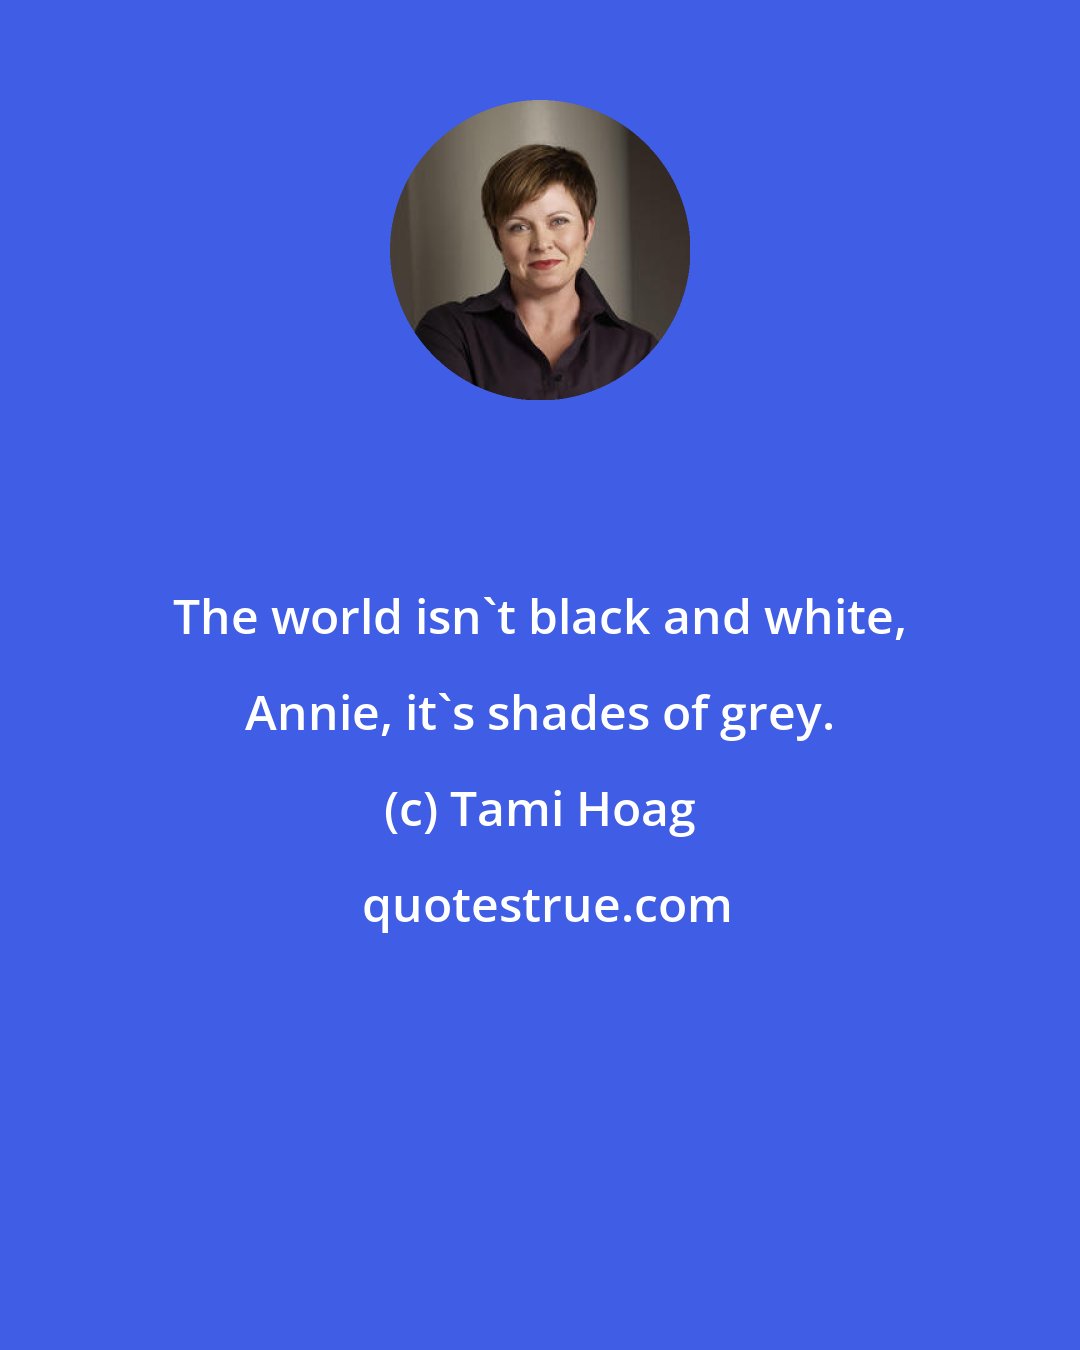 Tami Hoag: The world isn't black and white, Annie, it's shades of grey.